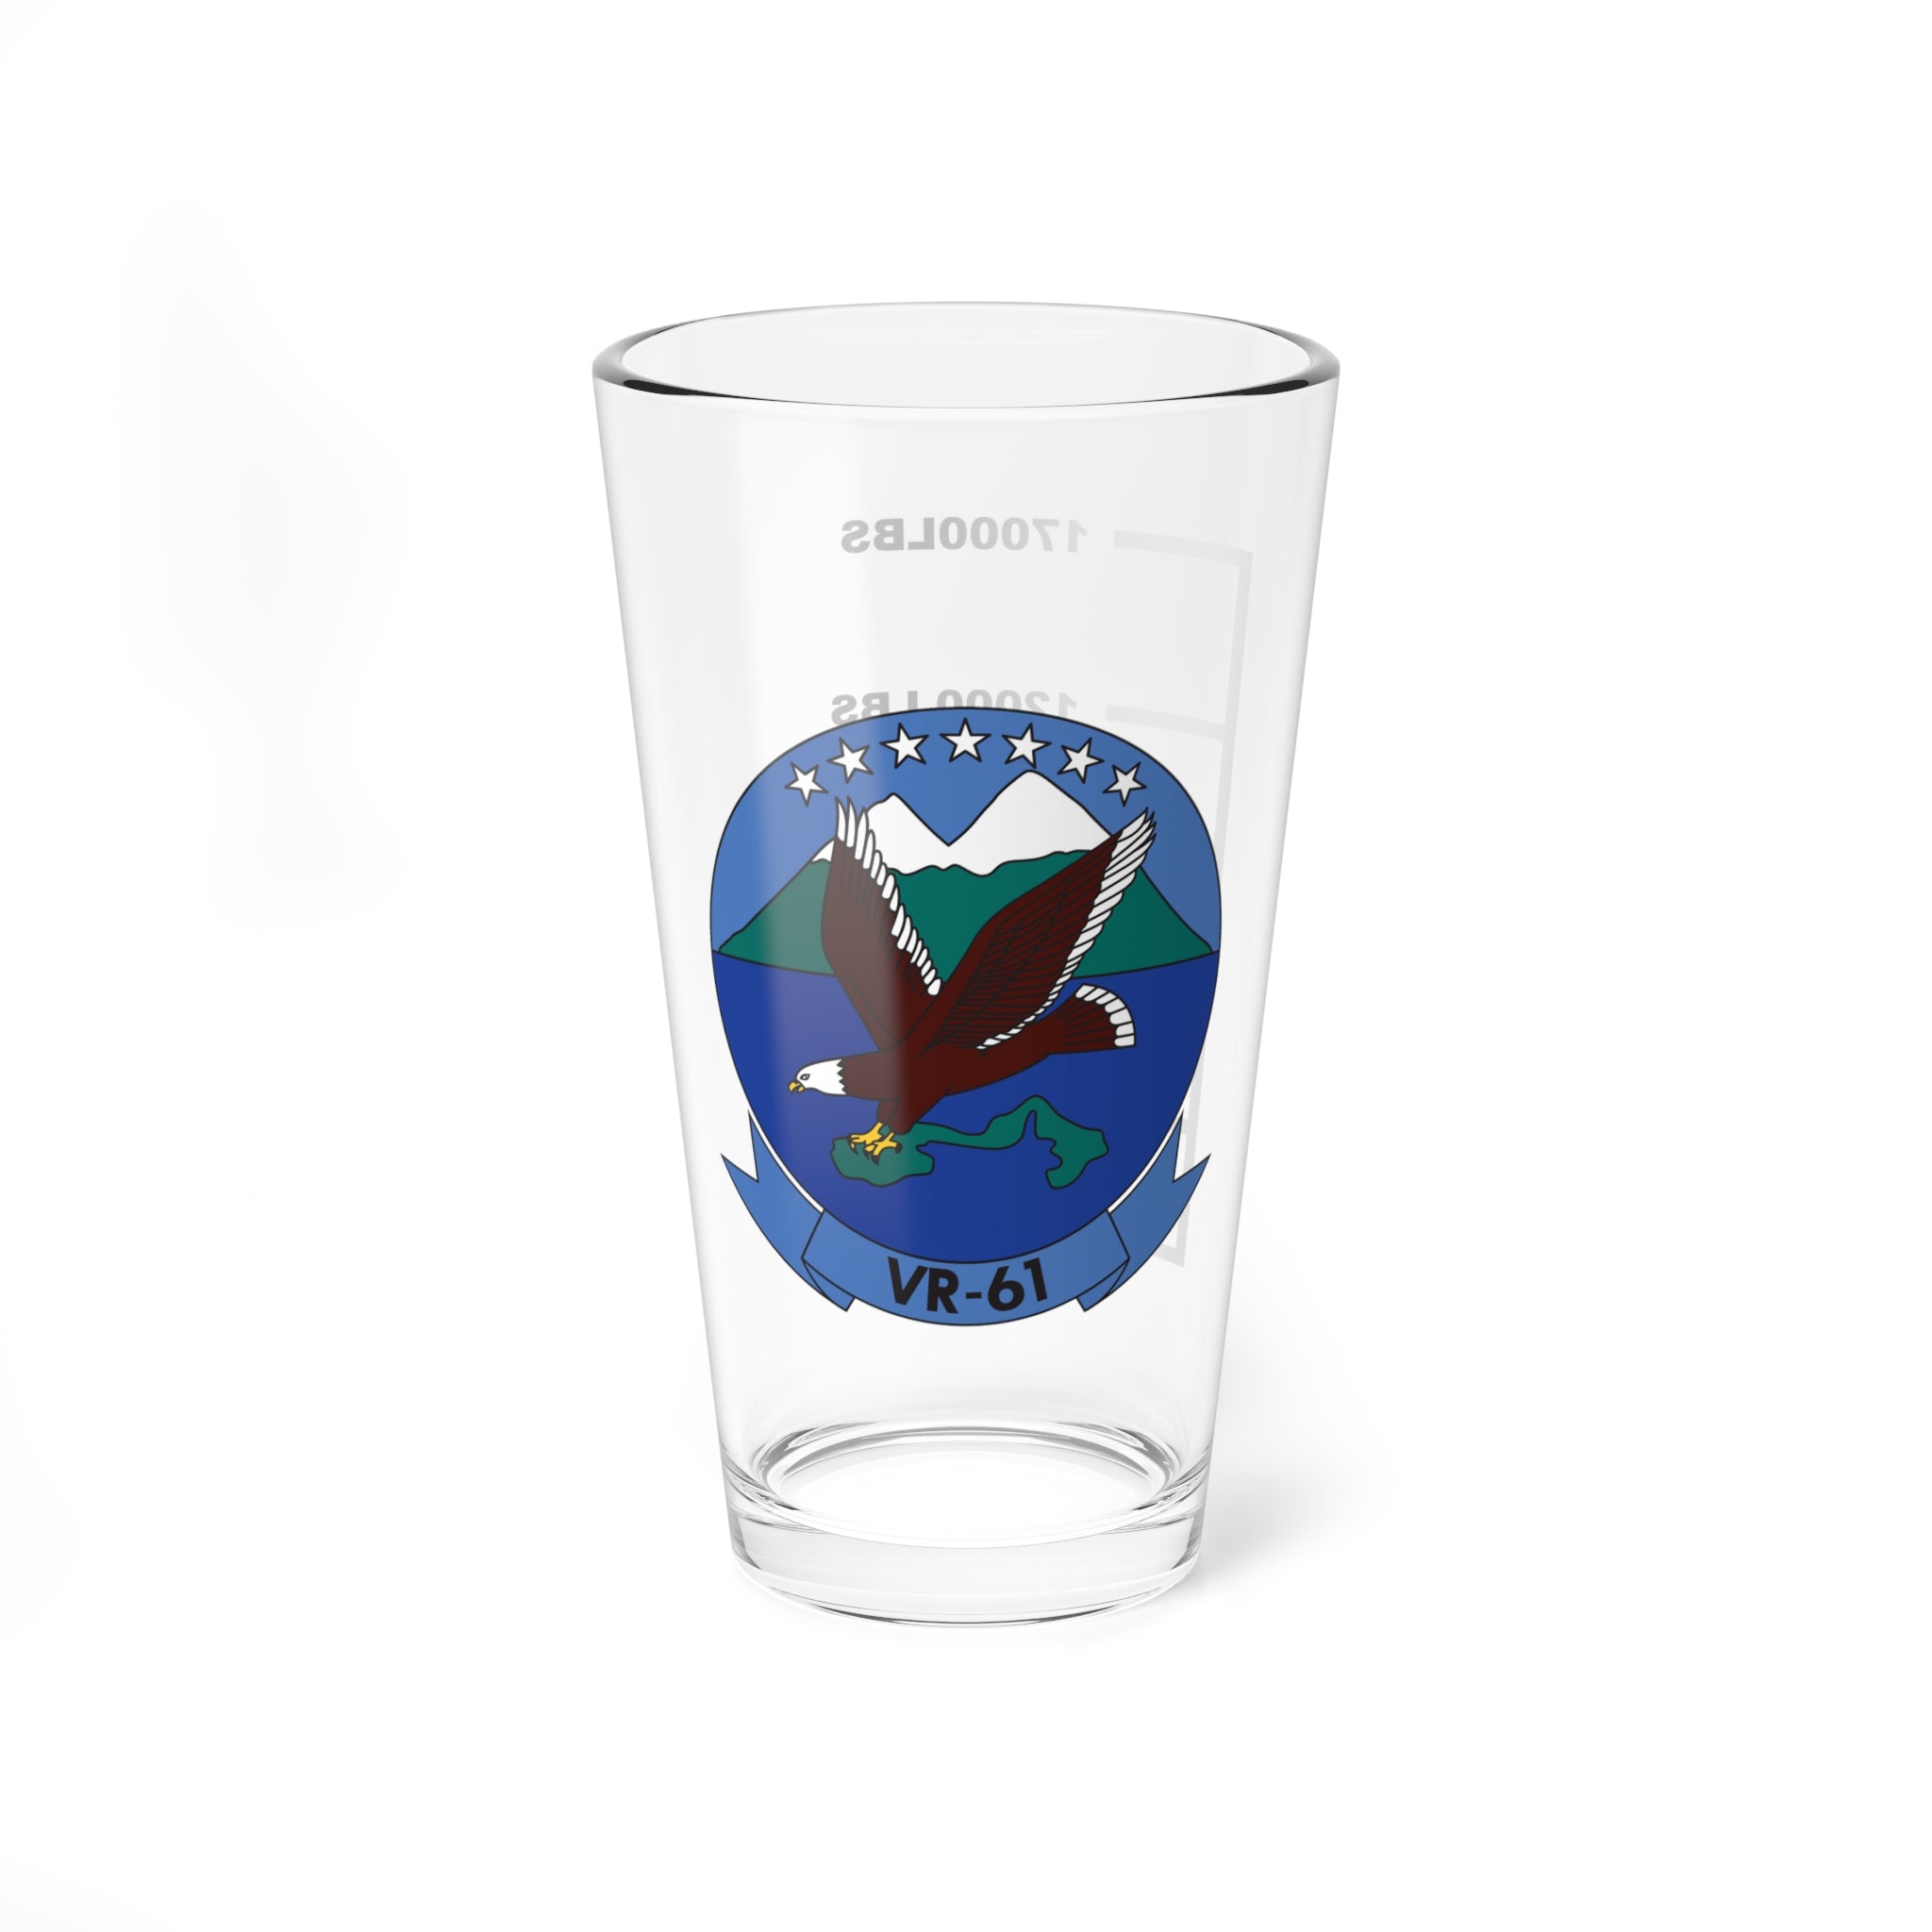 VR-61 "Islanders"  Fuel Low Pint Glass, Navy Fleet Logistics Support Squadron flying the C-40 Clipper